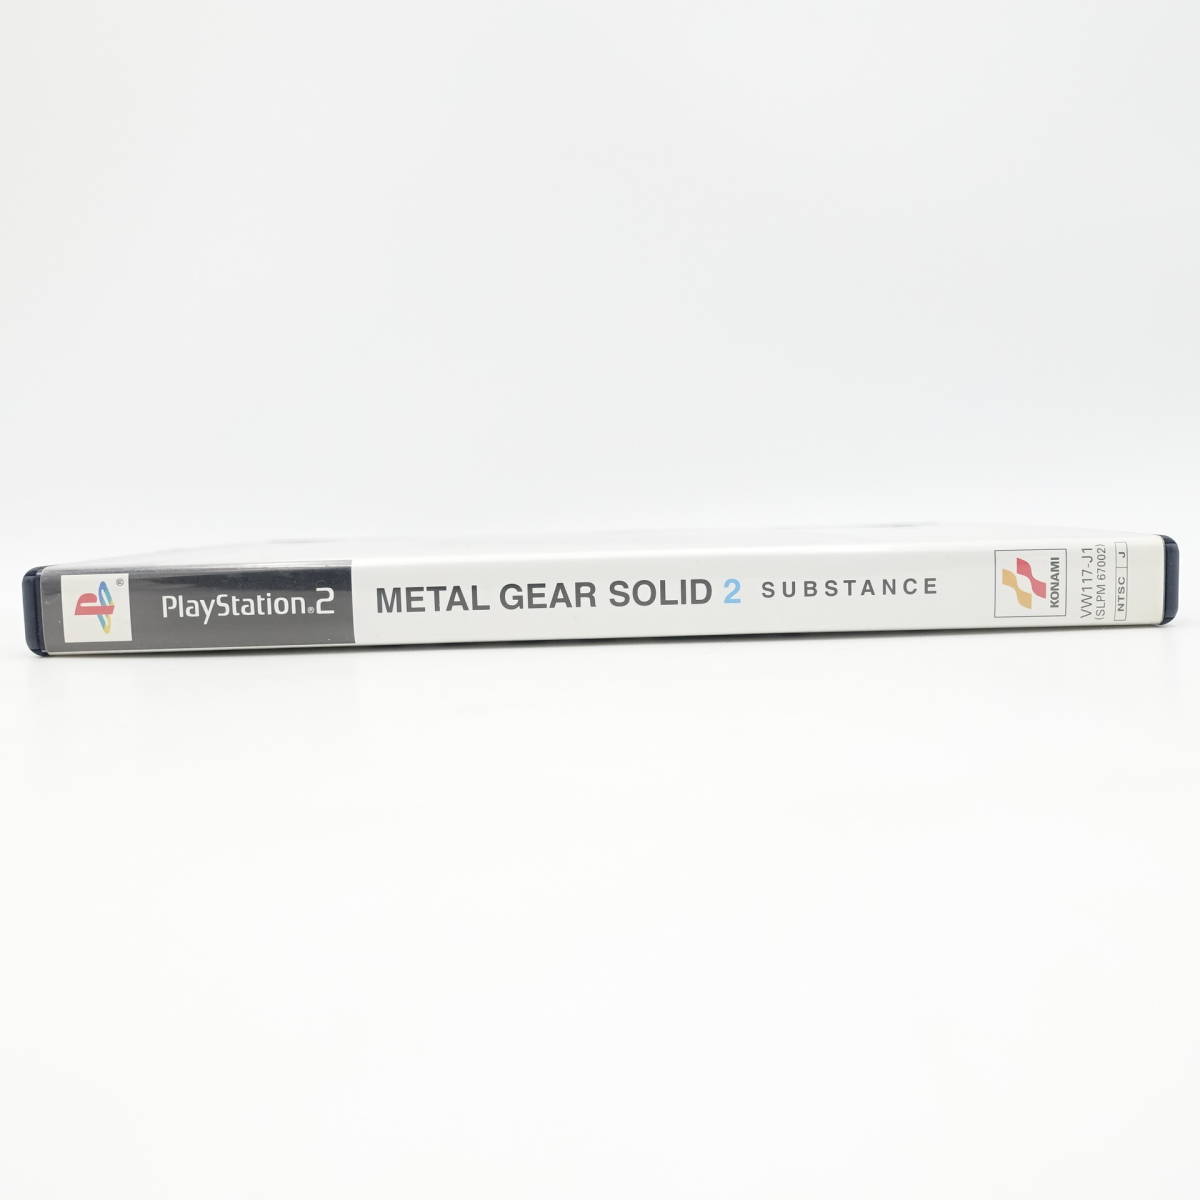 PS2 メタルギアソリッド2 ゲームソフト METAL GEAR SOLID 2 SUBSTANCE PlayStation プレステ 中古/13358_画像5